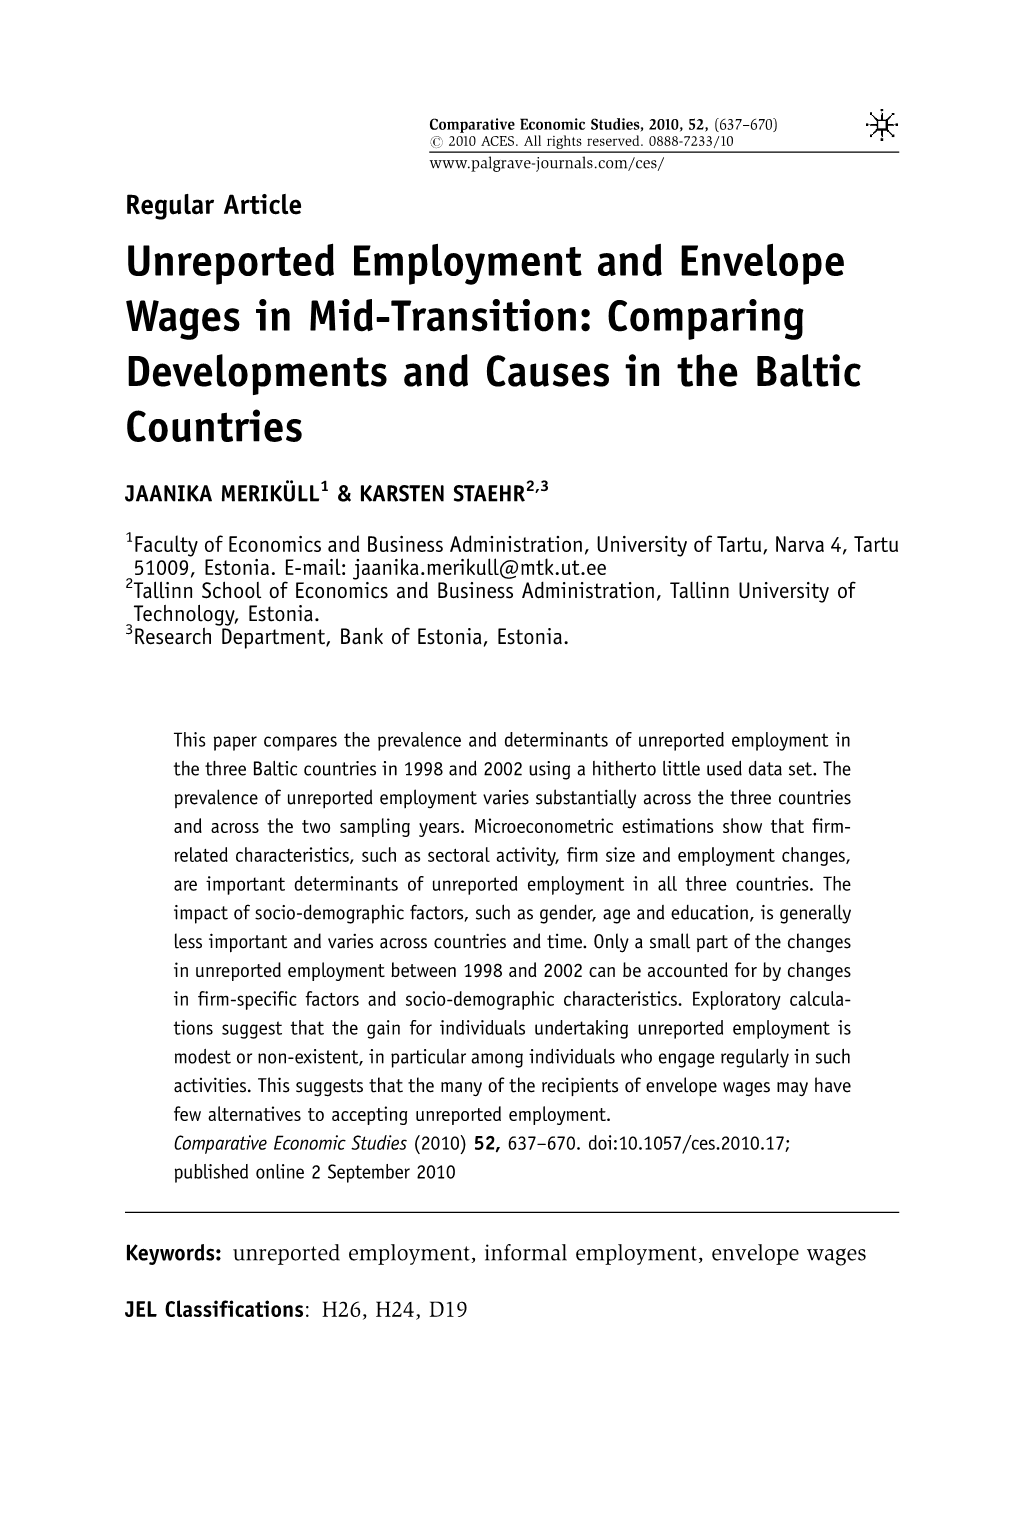 Unreported Employment and Envelope Wages in Mid-Transition: Comparing Developments and Causes in the Baltic Countries